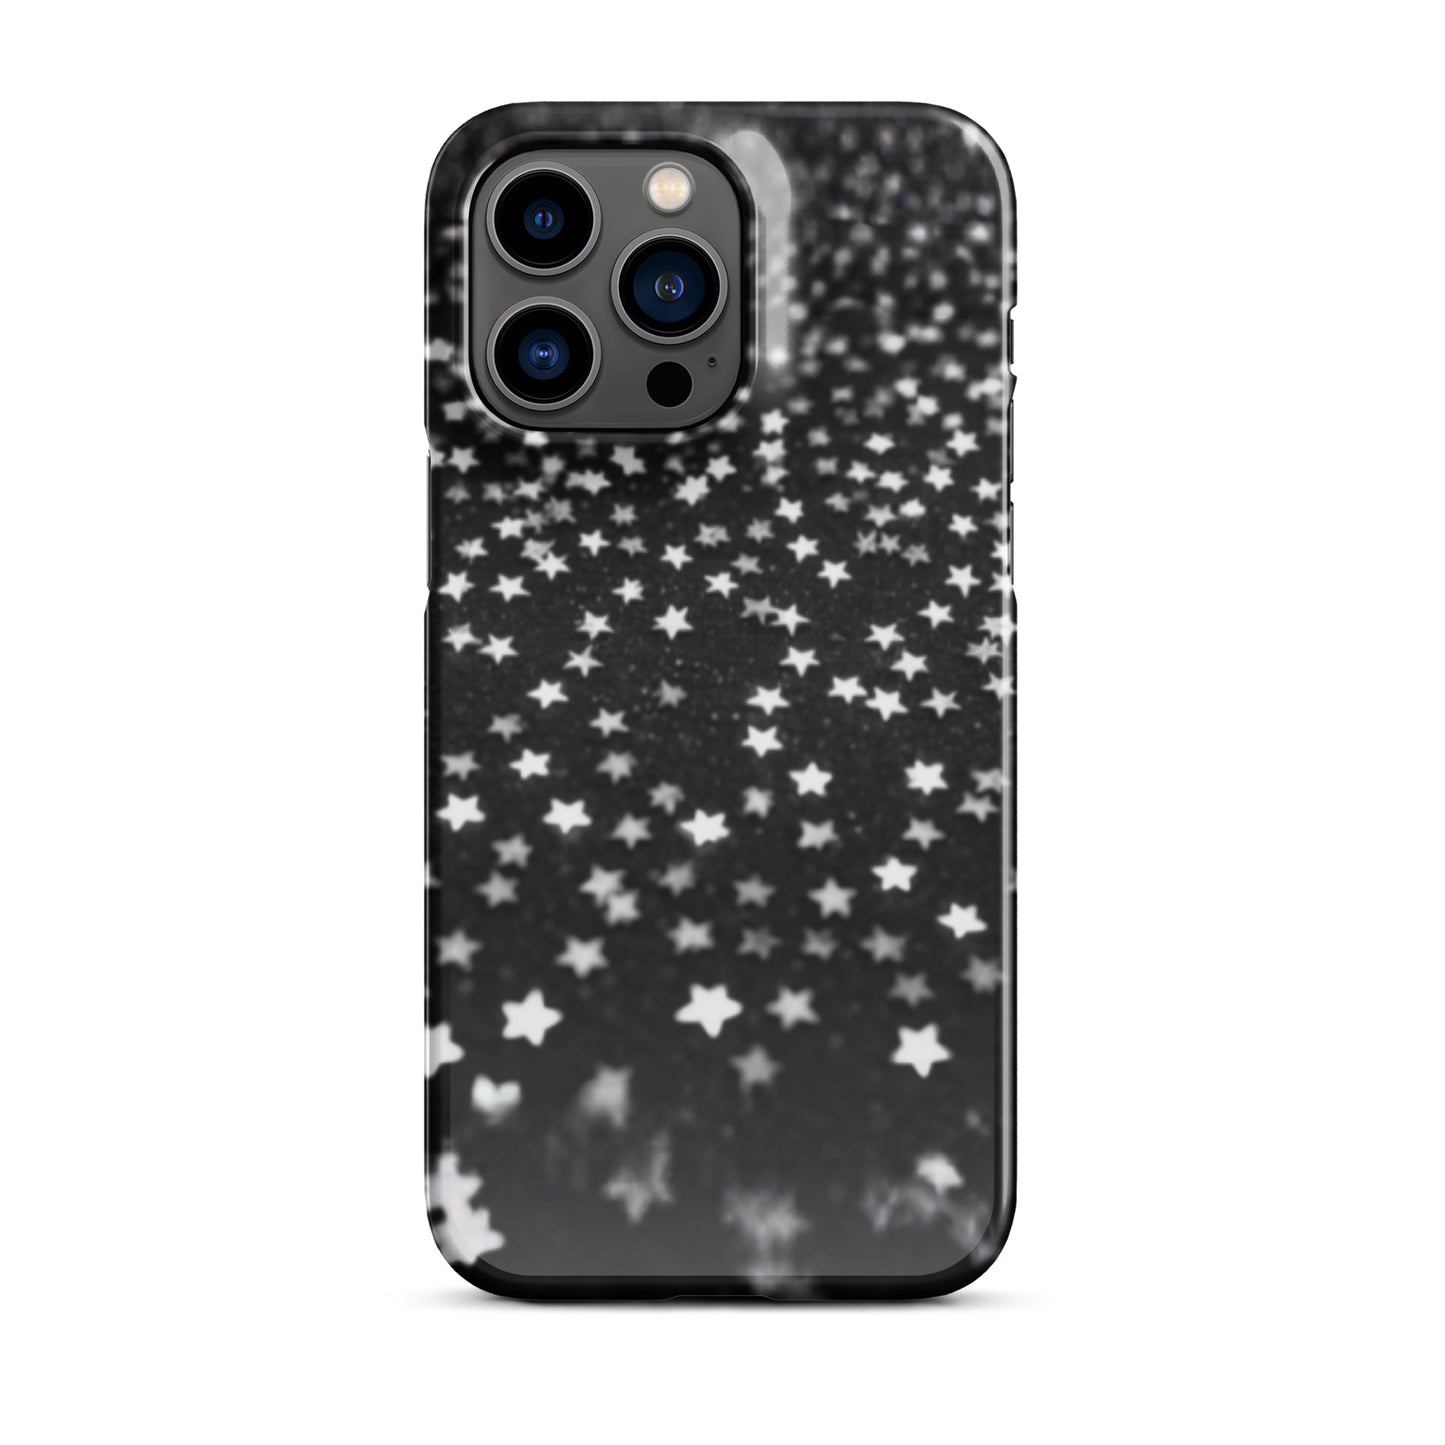 Starry Iphone Case